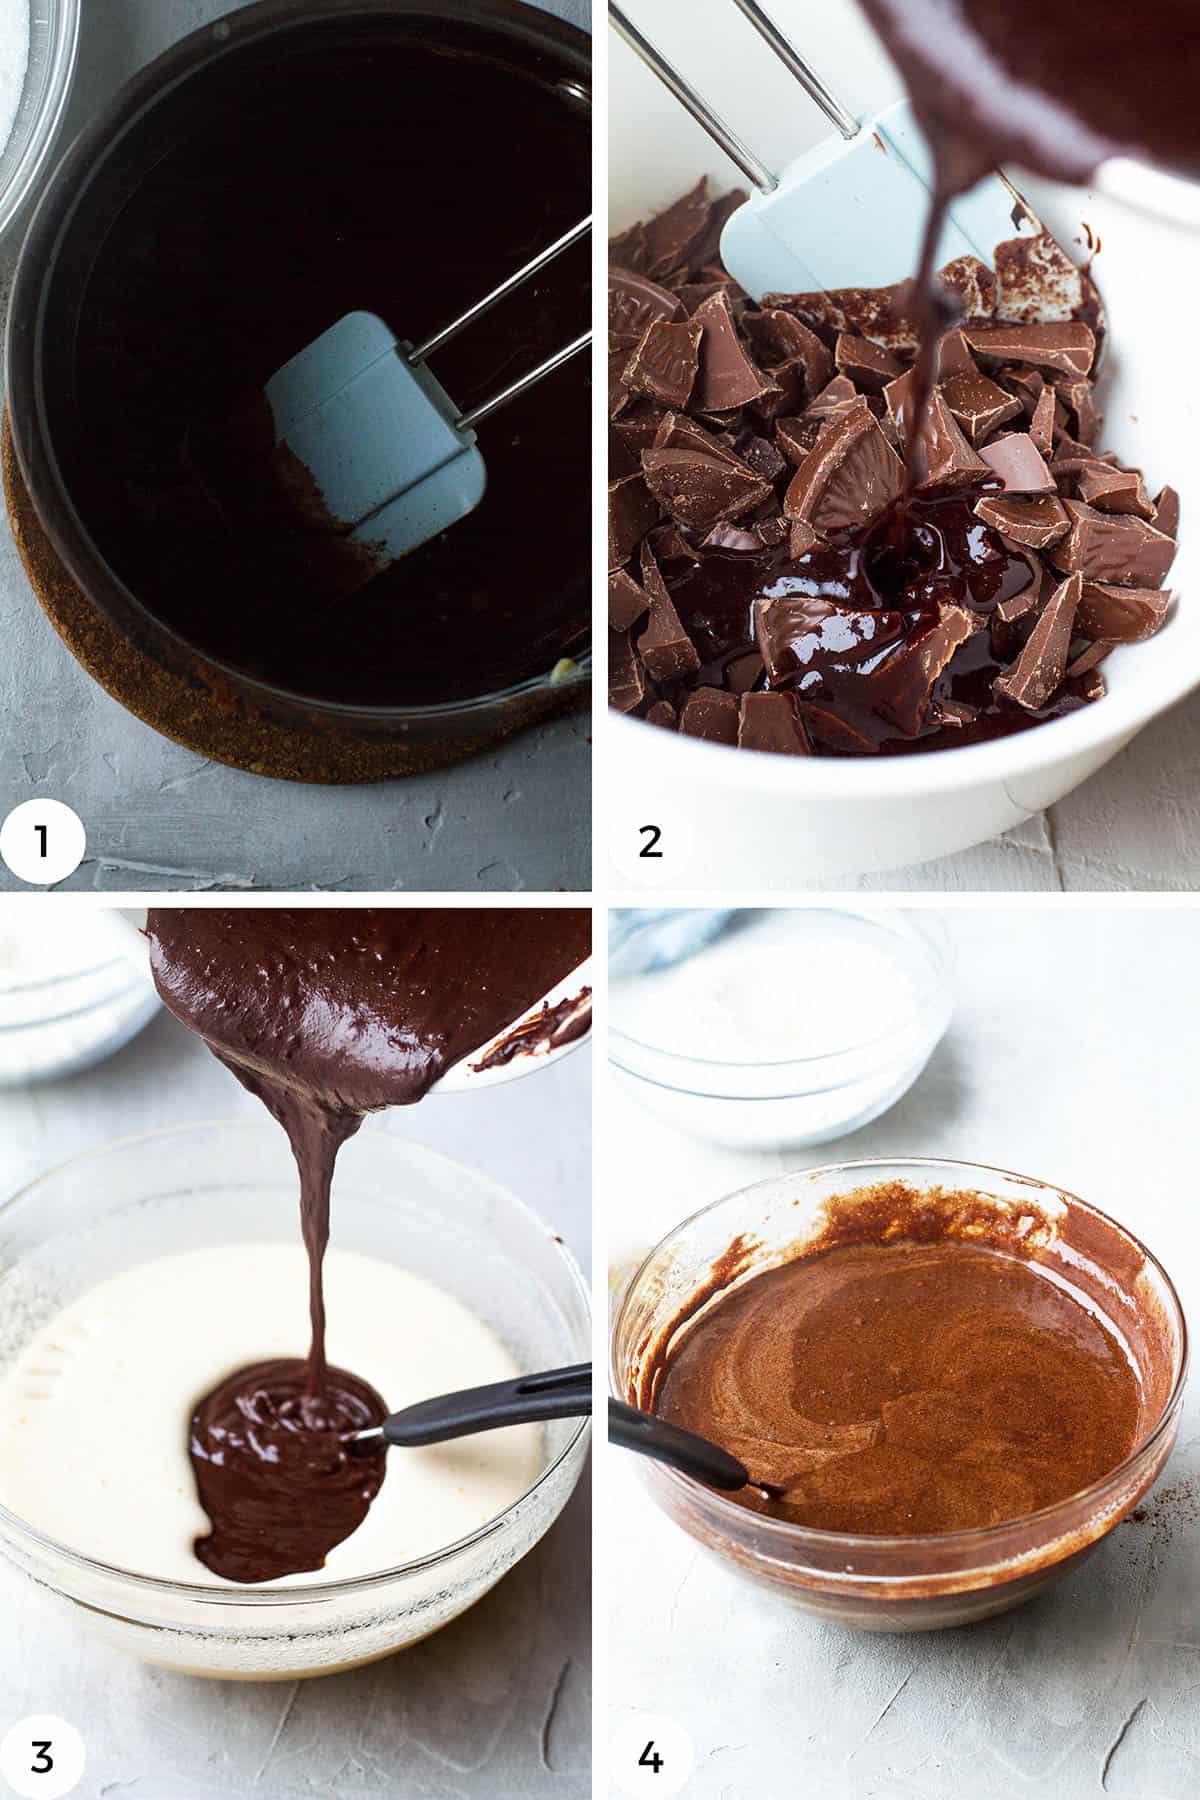 First 1-4 steps to make brownies.